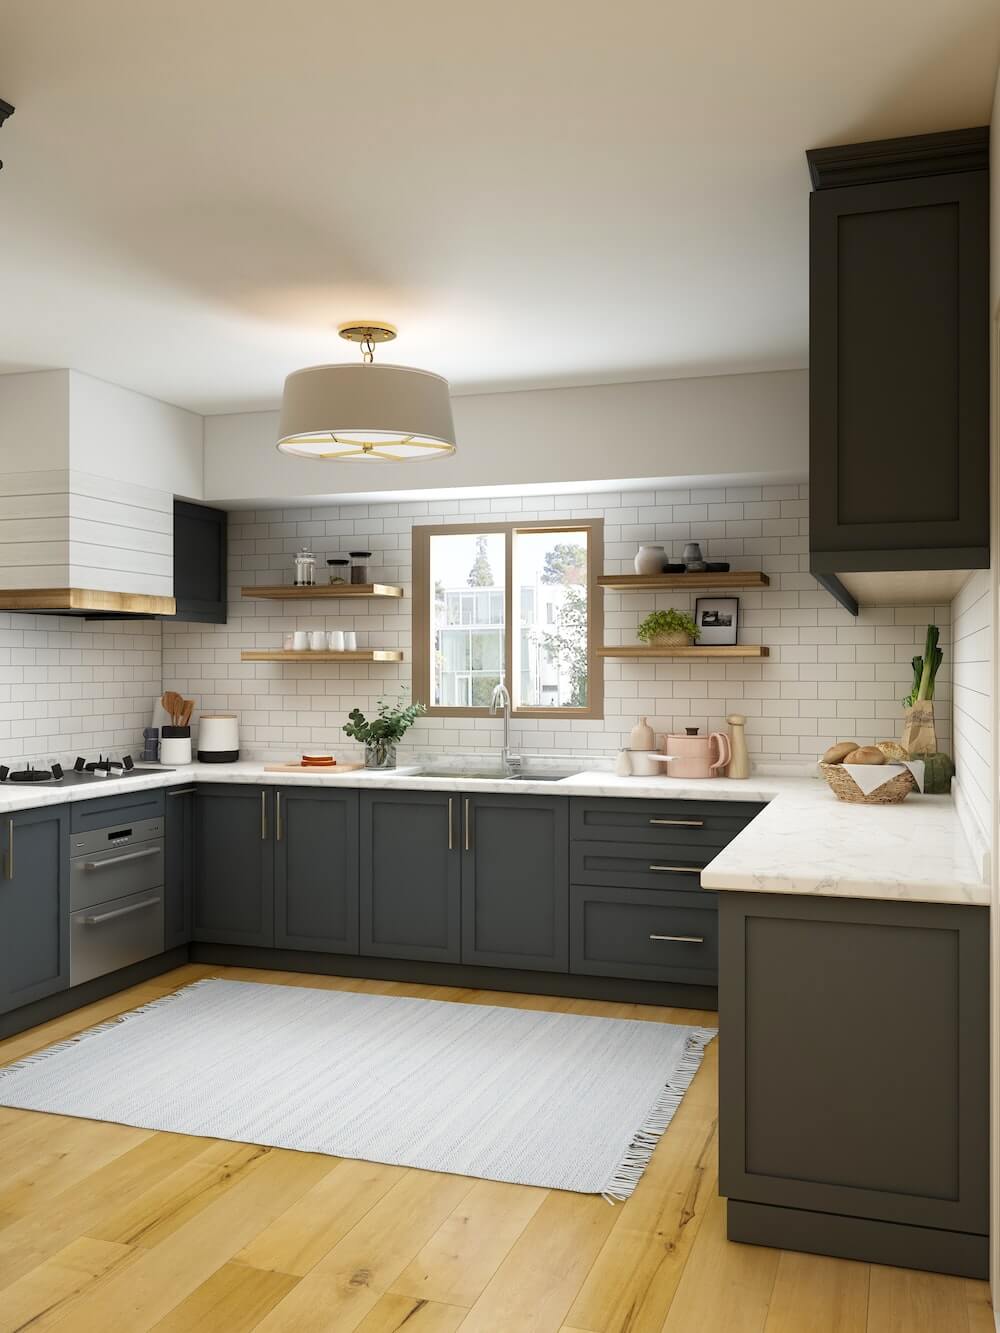 Which Modular Kitchen Hob to Select - Inbuilt or Standalone